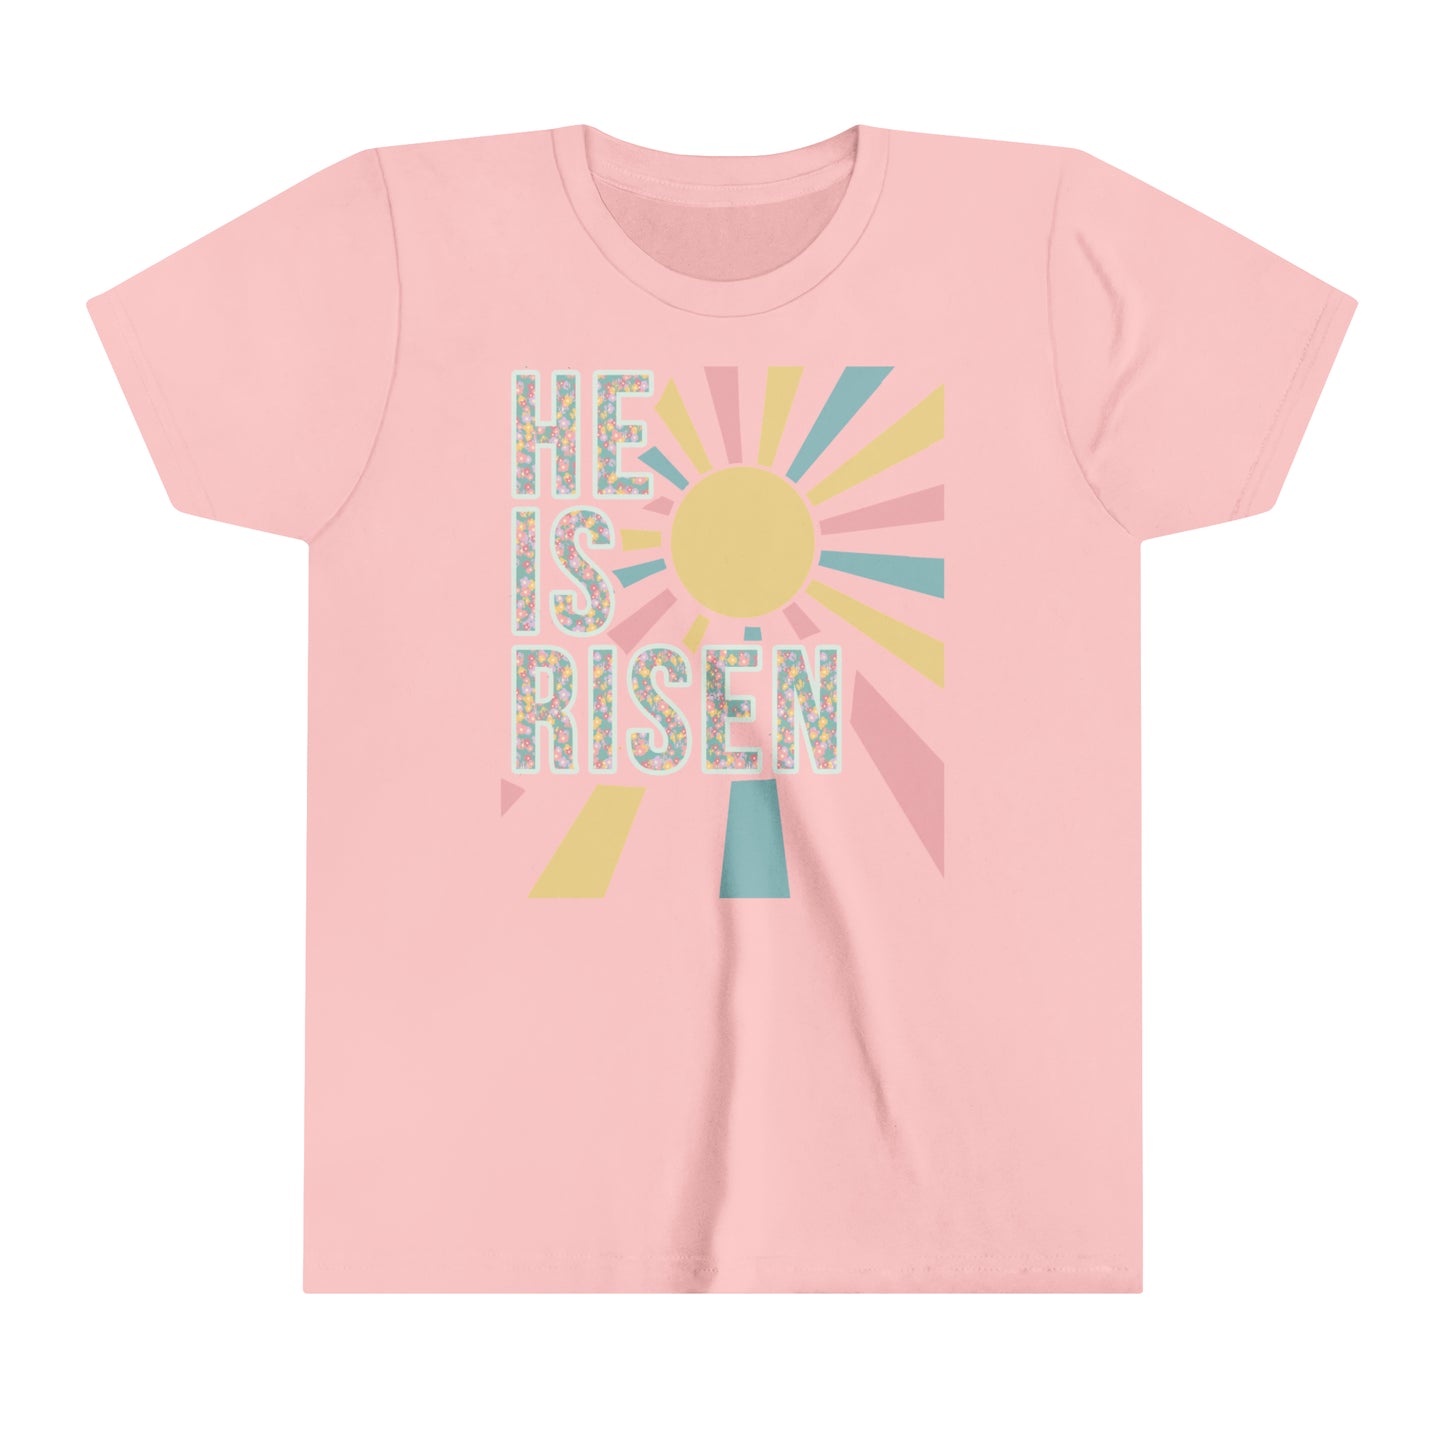 He Is Risen - Youth | Kid's Easter Tee